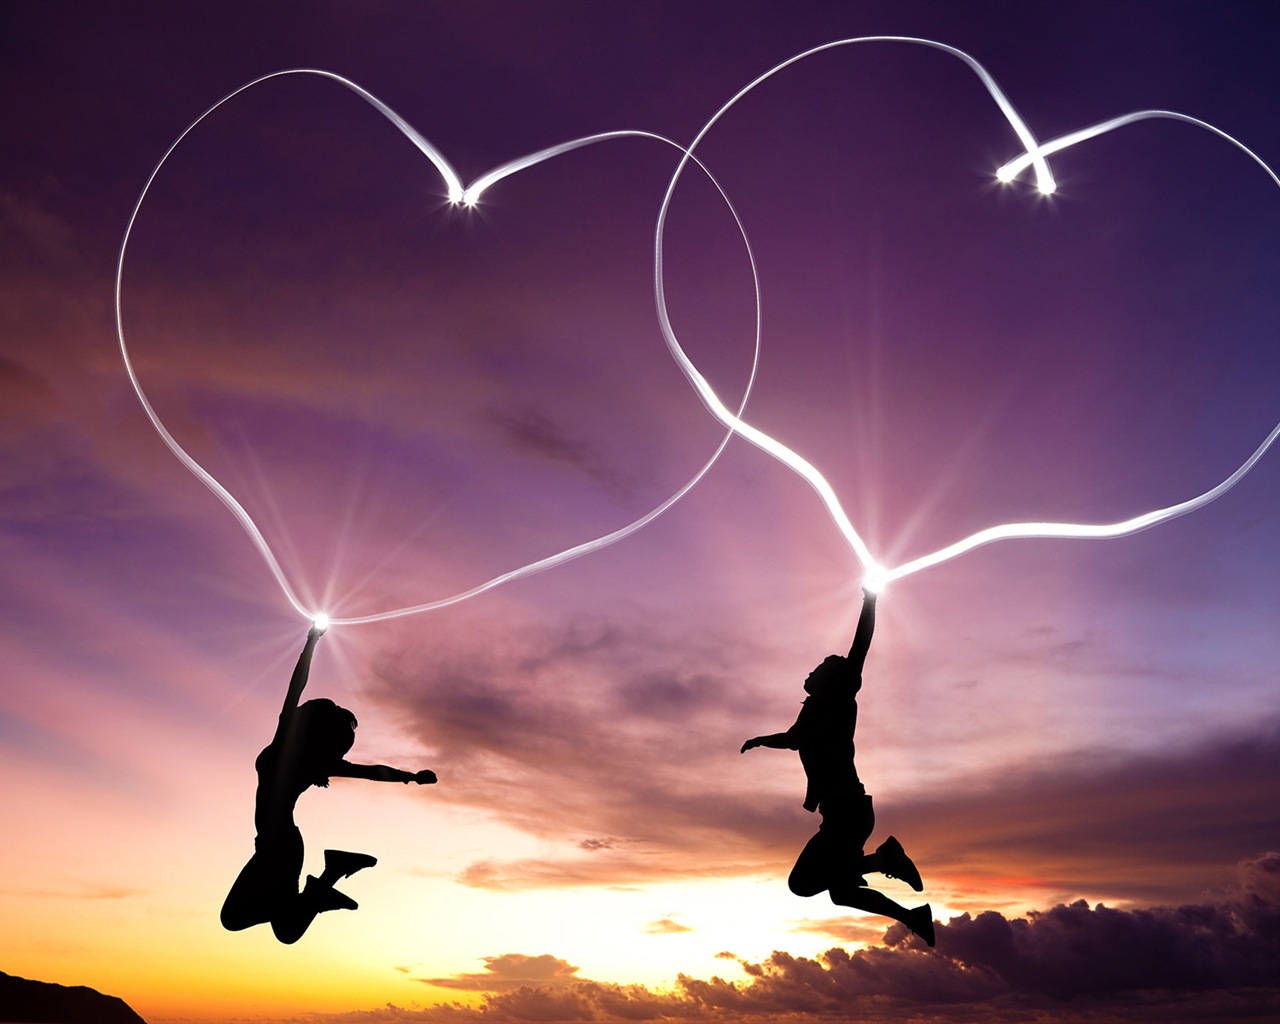 The theme of love, creative heart-shaped HD wallpapers #14 - 1280x1024